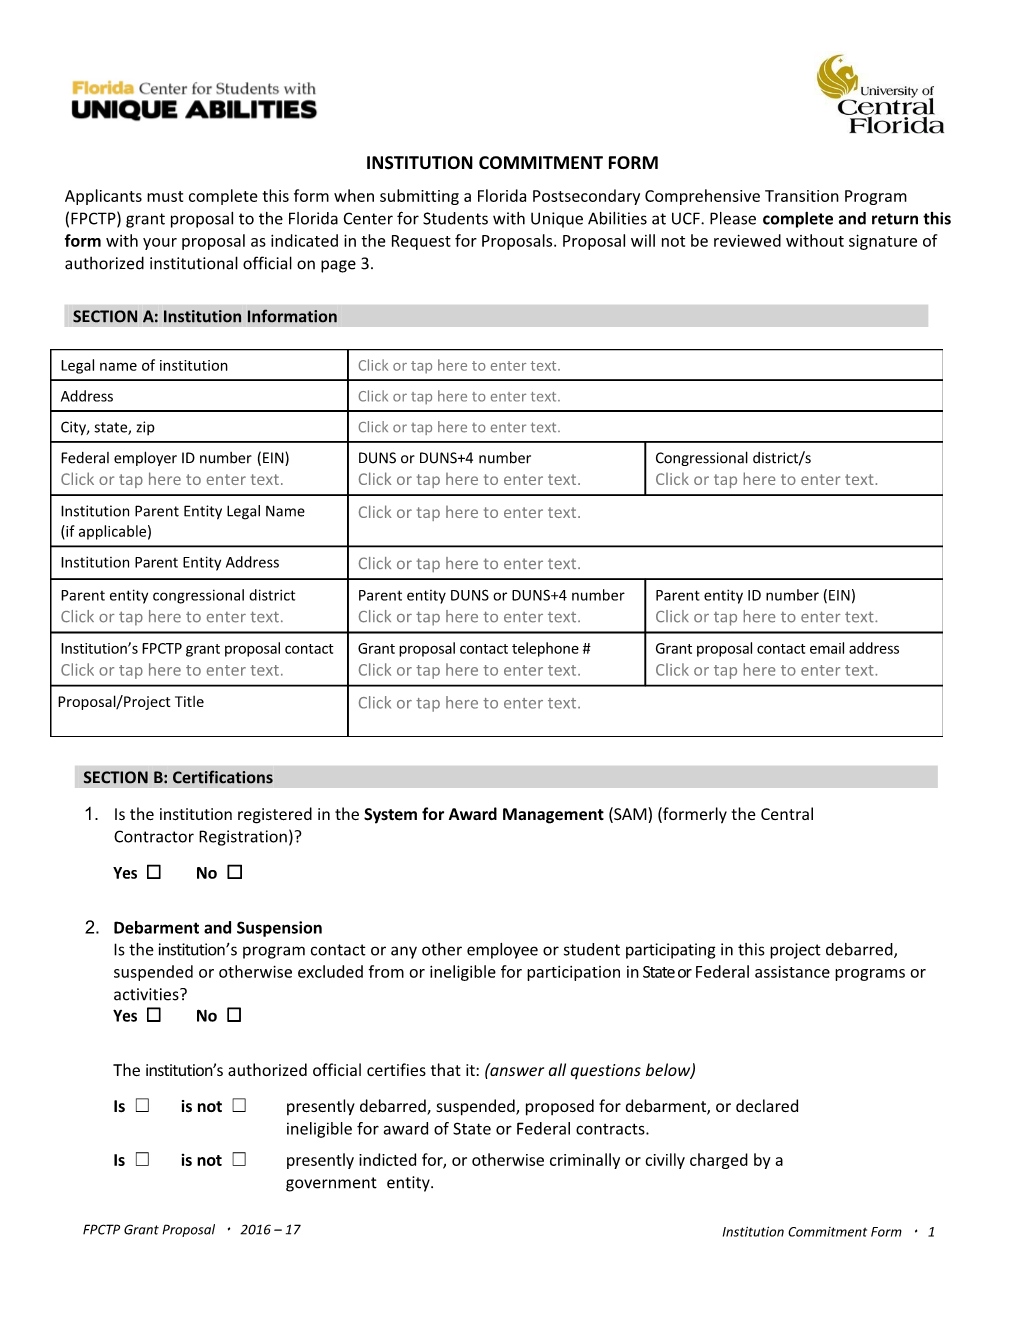 Subrecipient Committment Form Word 10.18.2016